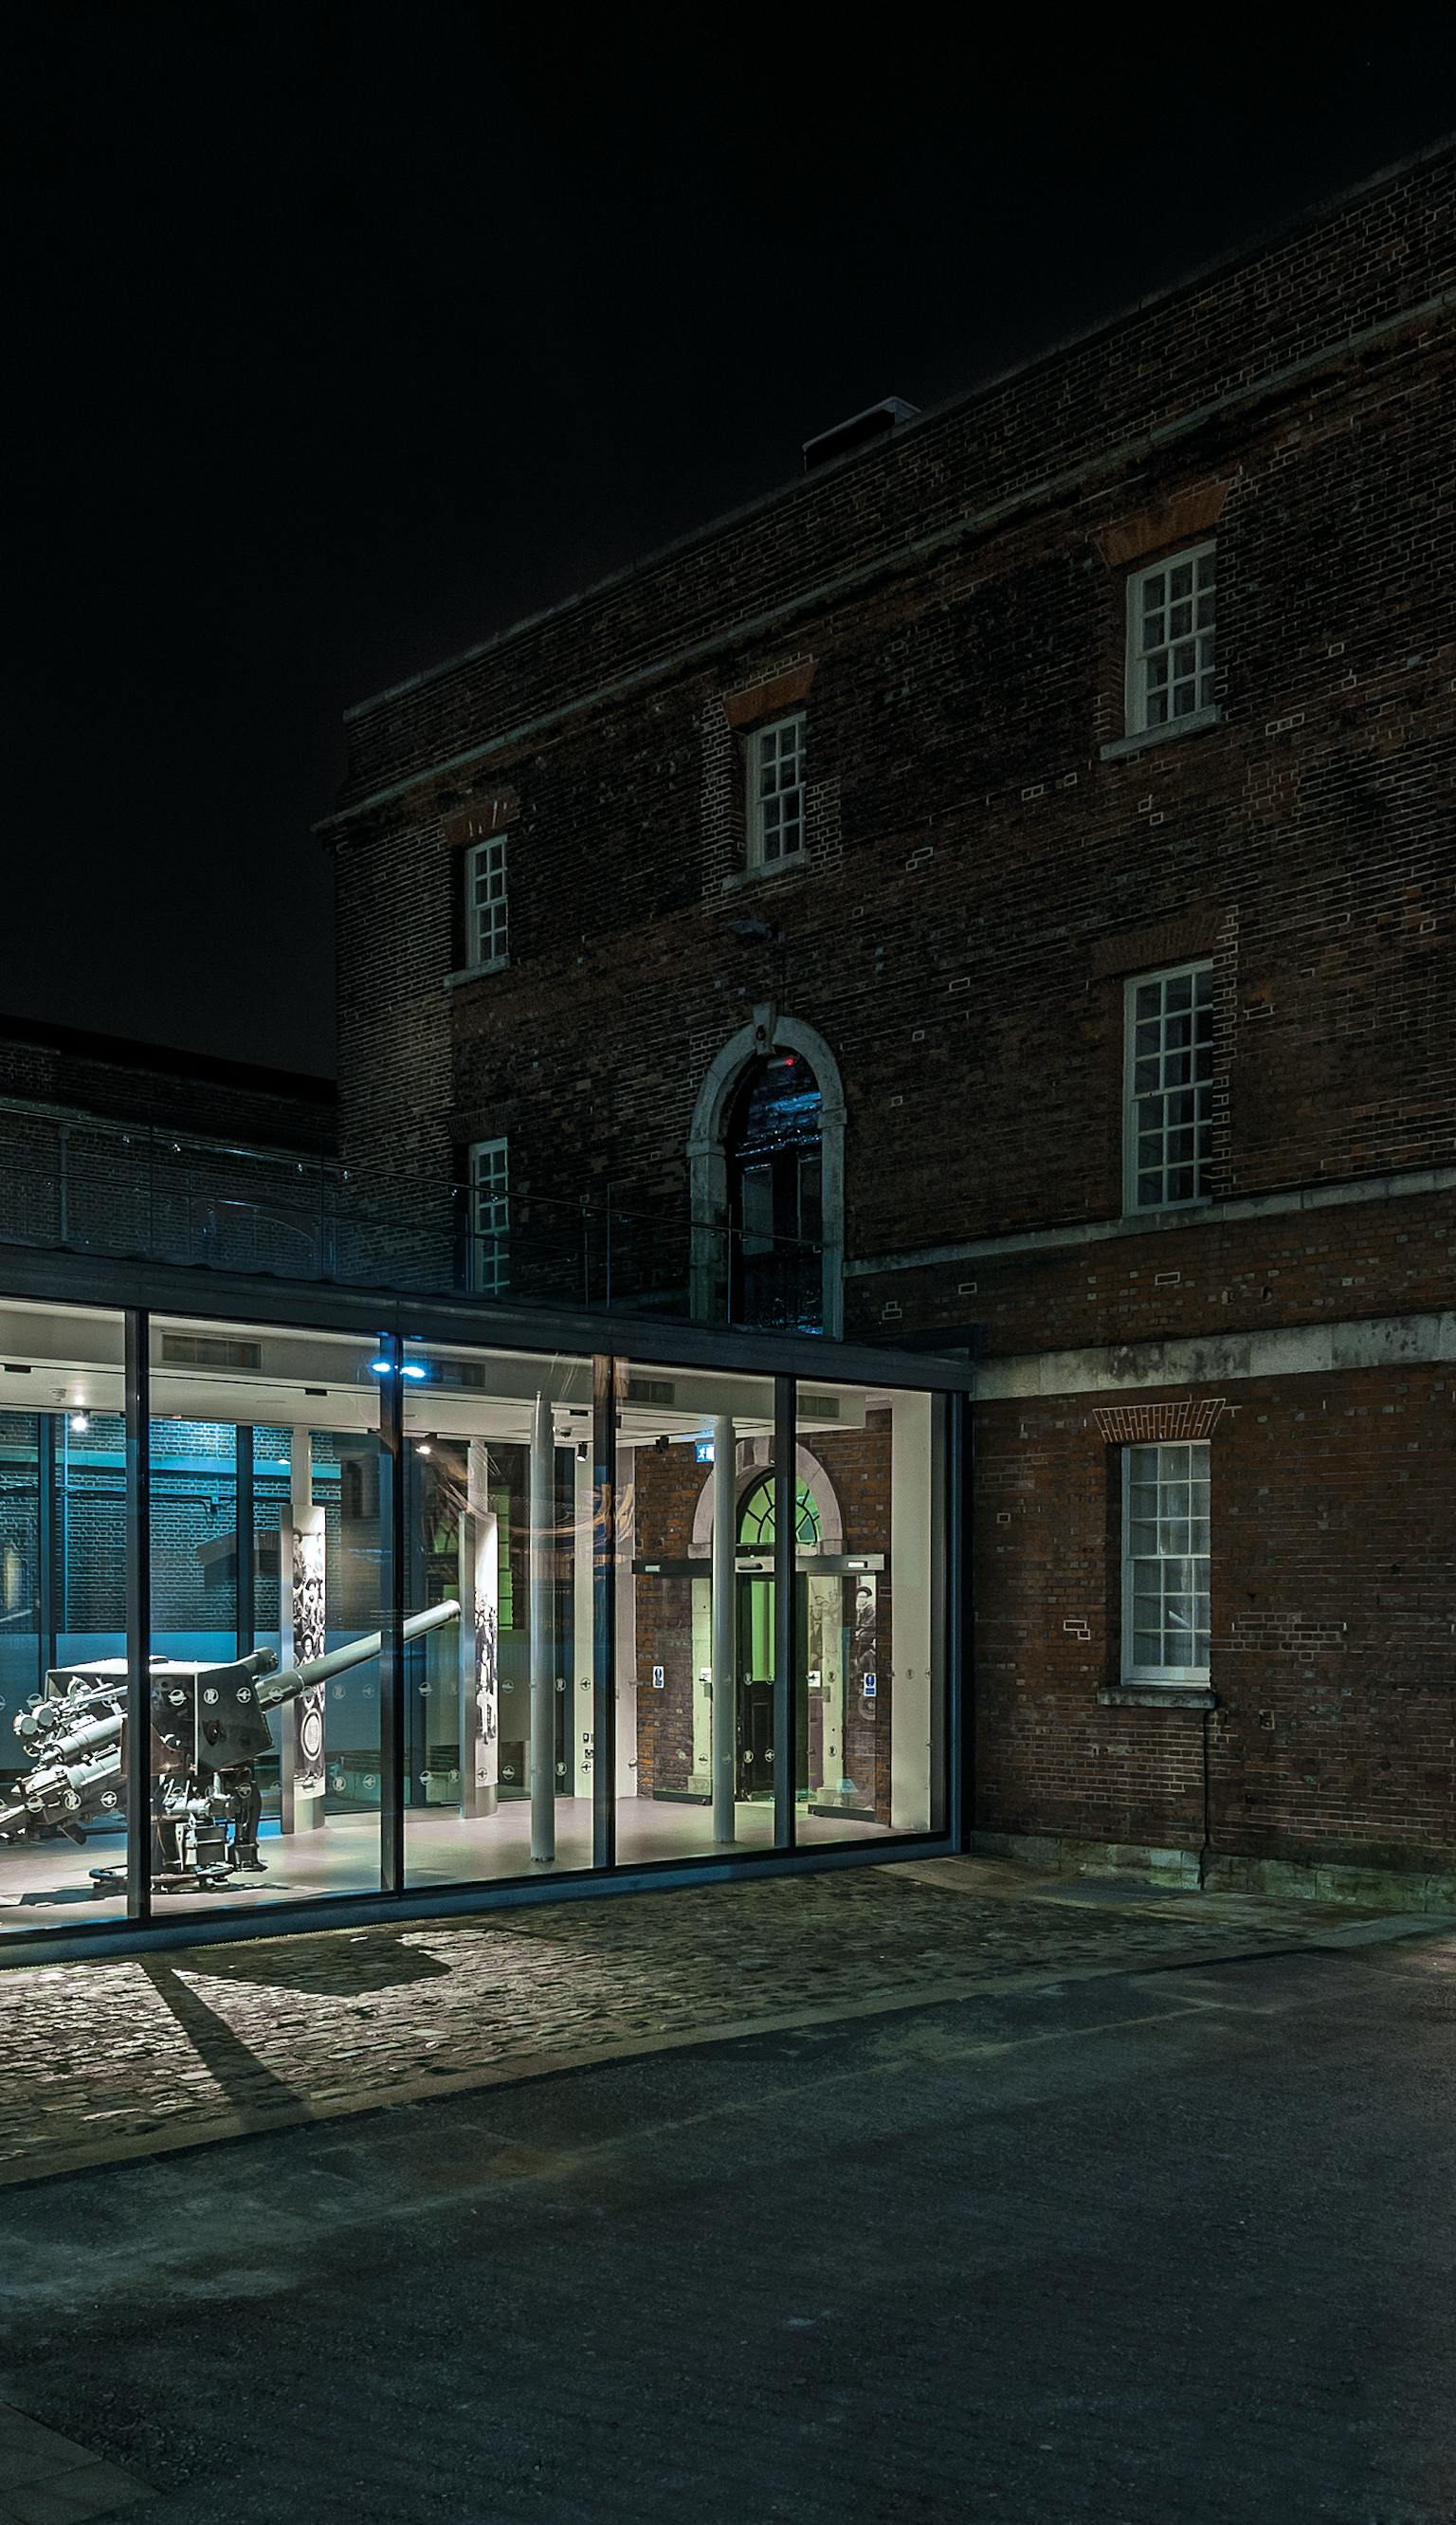 Purcell transformed an 18th Century naval storehouse into a new interactive gallery space as part of the National Museum of the Royal Navy.